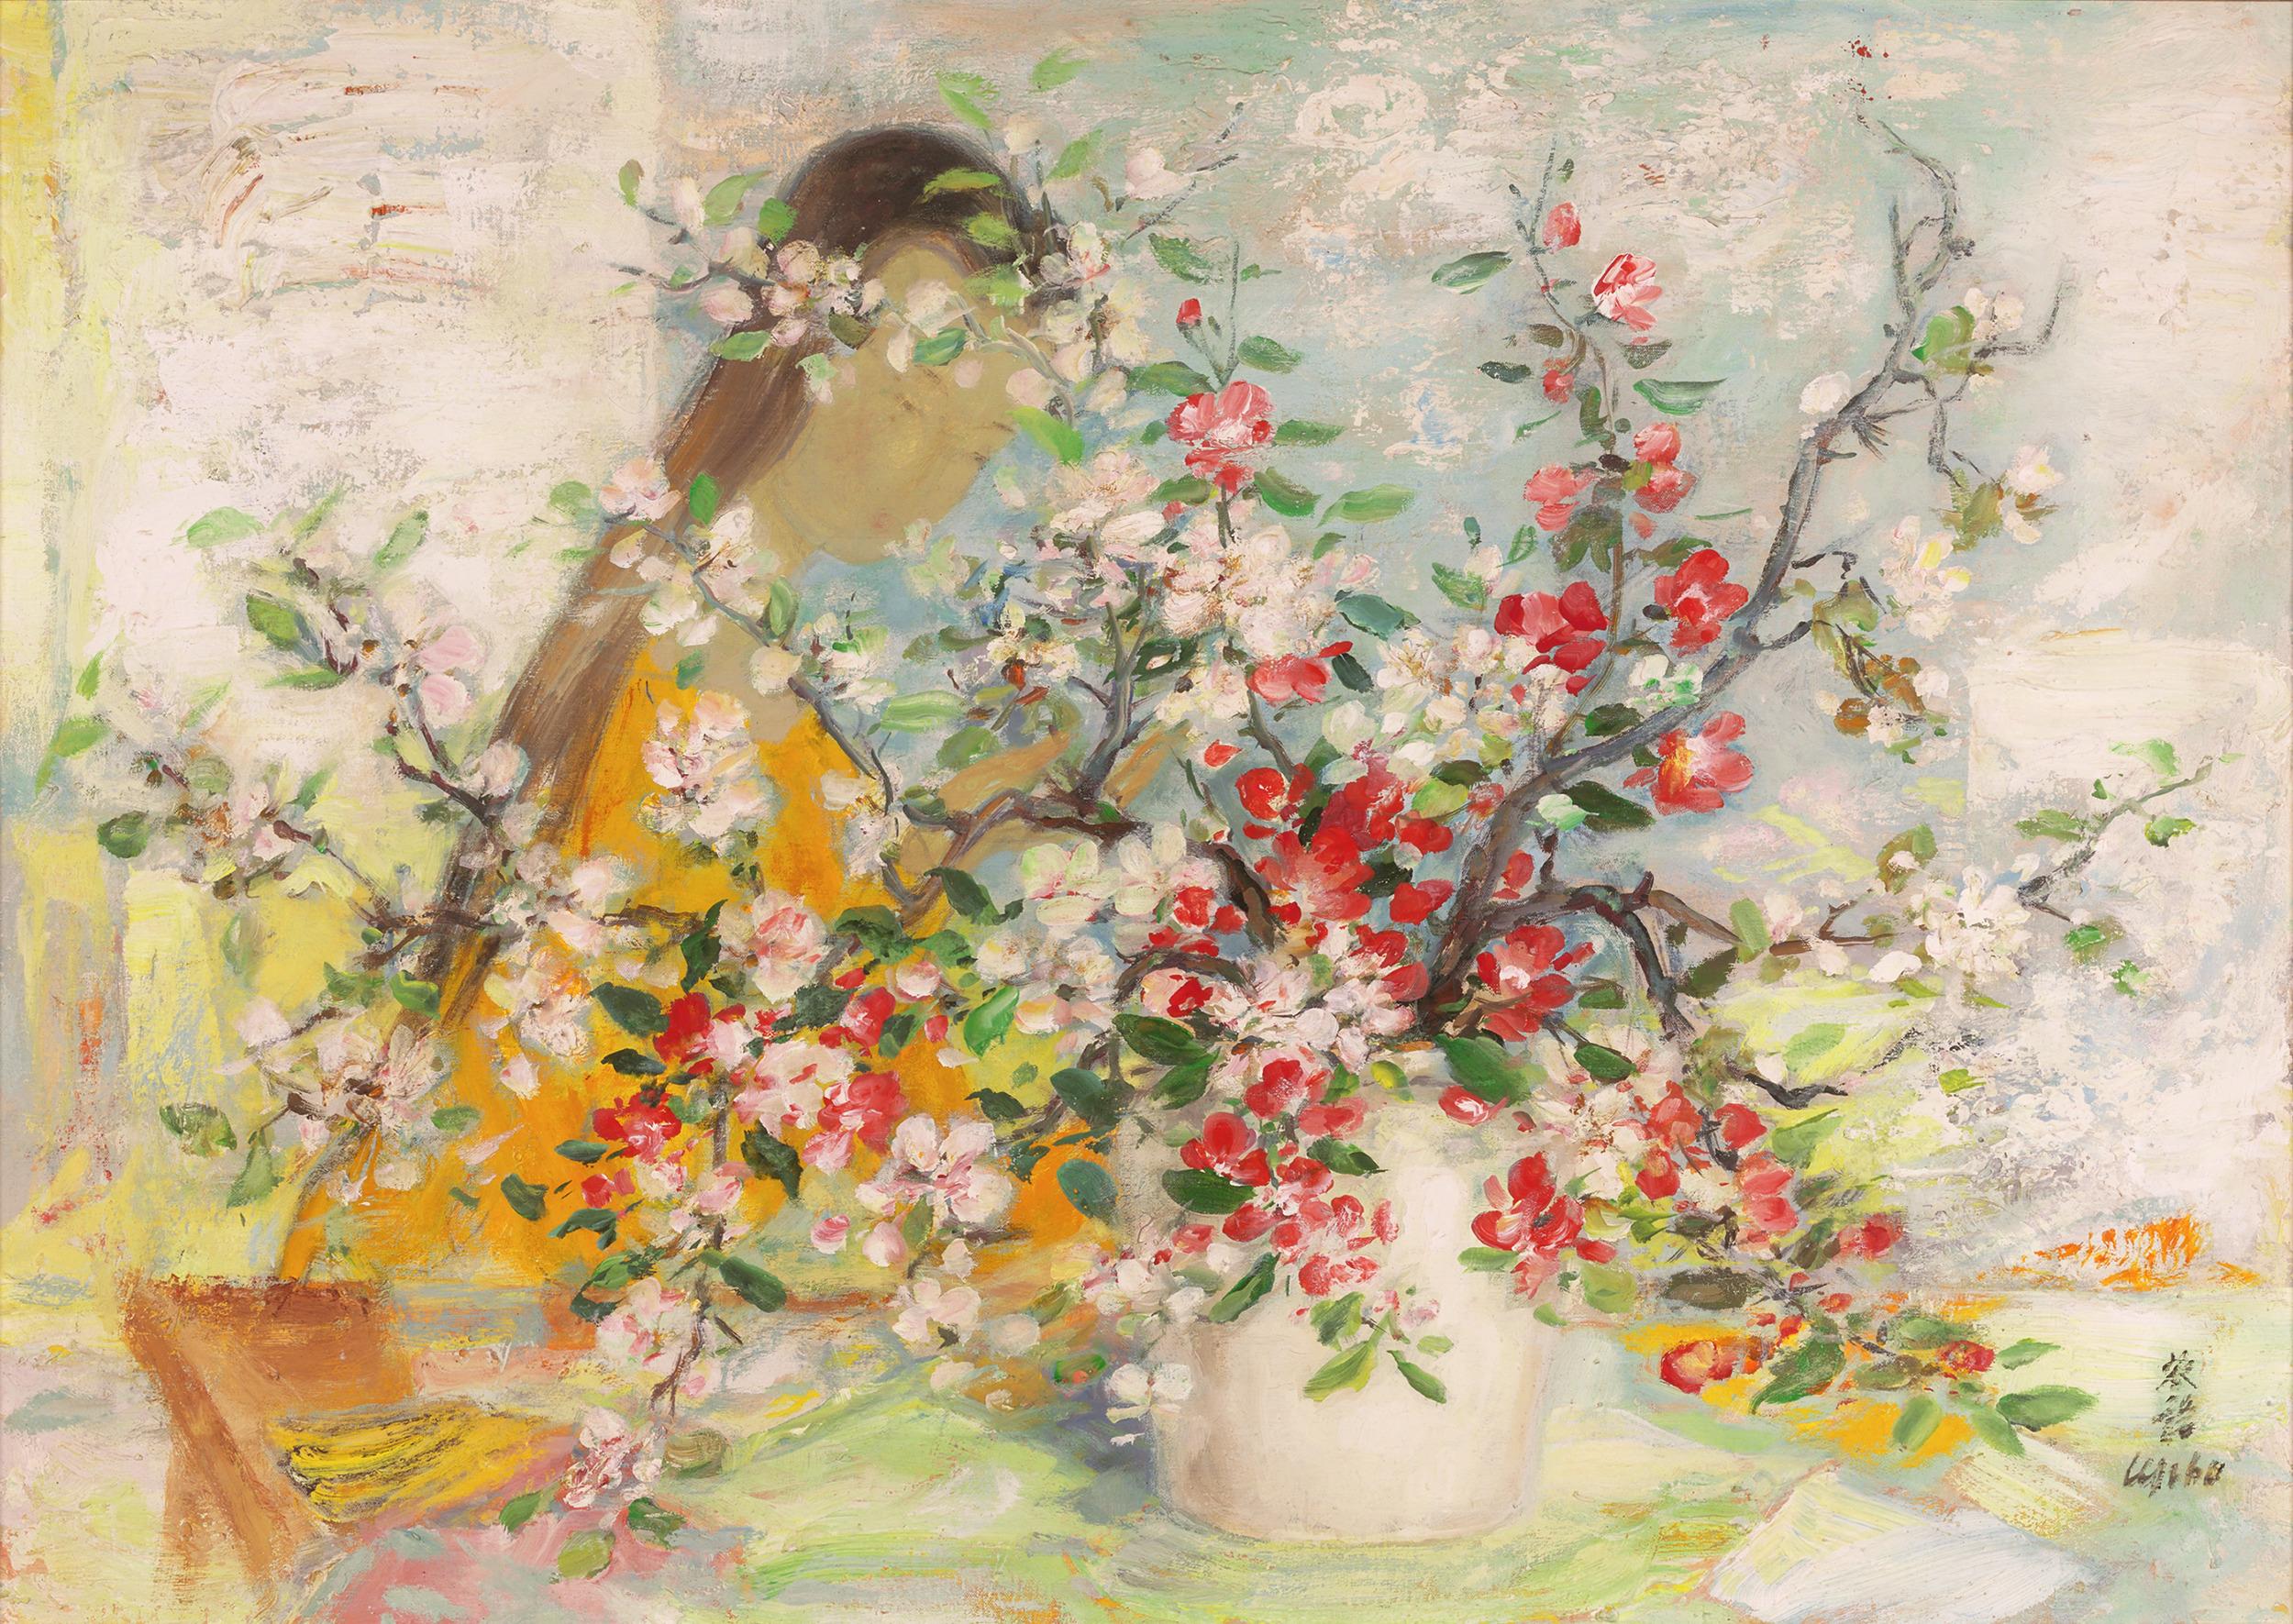 Lê Phổ
1907-2001  Vietnamese-French

Le vase chinois
(The Chinese Vase)

Signed "Le Pho" with Chinese characters (lower right)
Oil on canvas

A woman's visage appears behind a spray of fresh flowers in this serene oil by Vietnamese painter Le Pho.